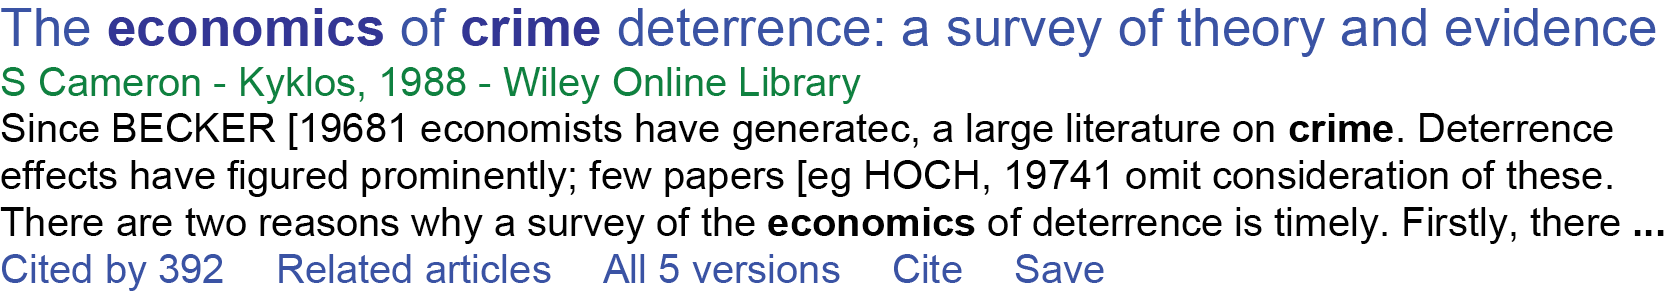 A screen capture of the Google scholar search results for “crime economics”, showing that it yielded the article "The economics of crime deterrence: a survey of theory and evidence"